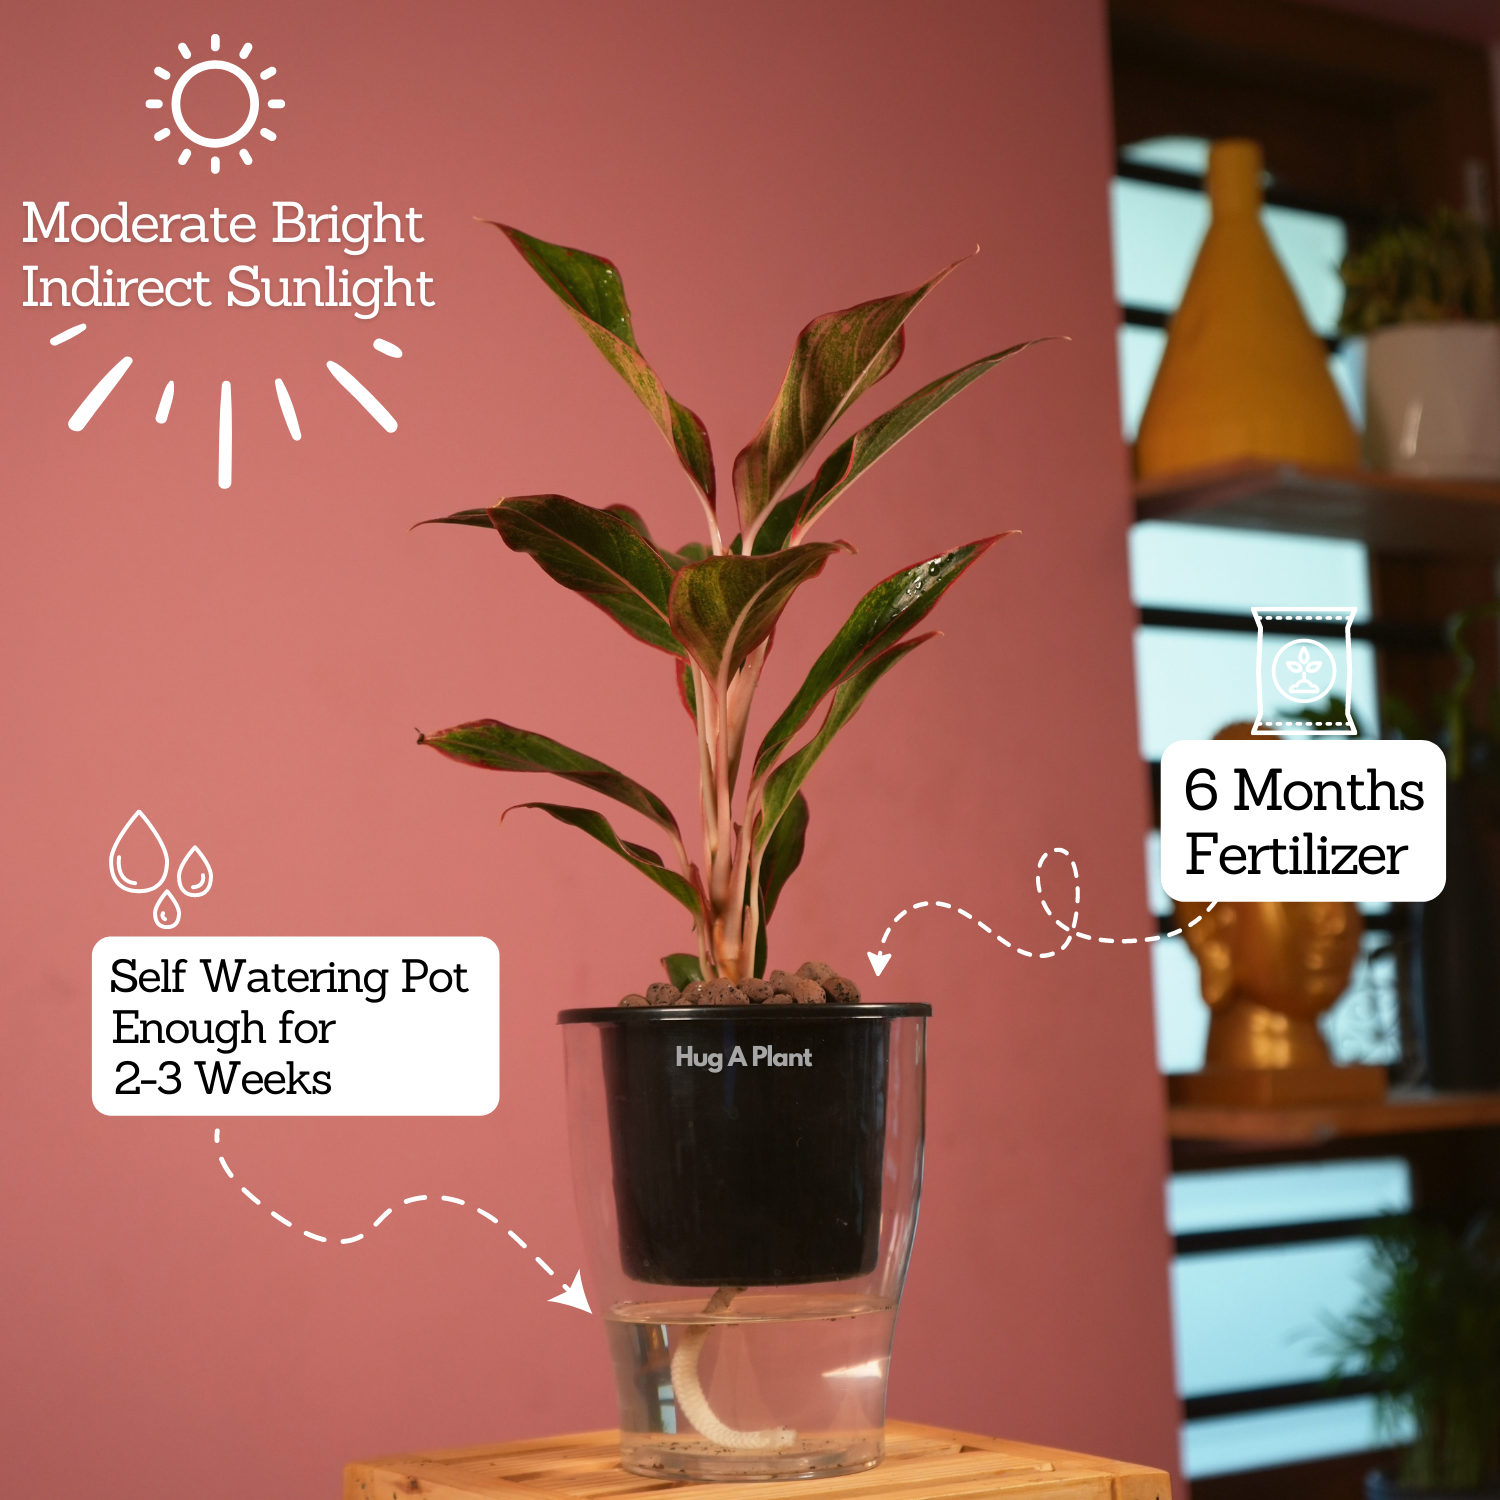 Aglaonema Lipstick - Live Plant (With 5 Inch Self-Watering Pot & Plant)